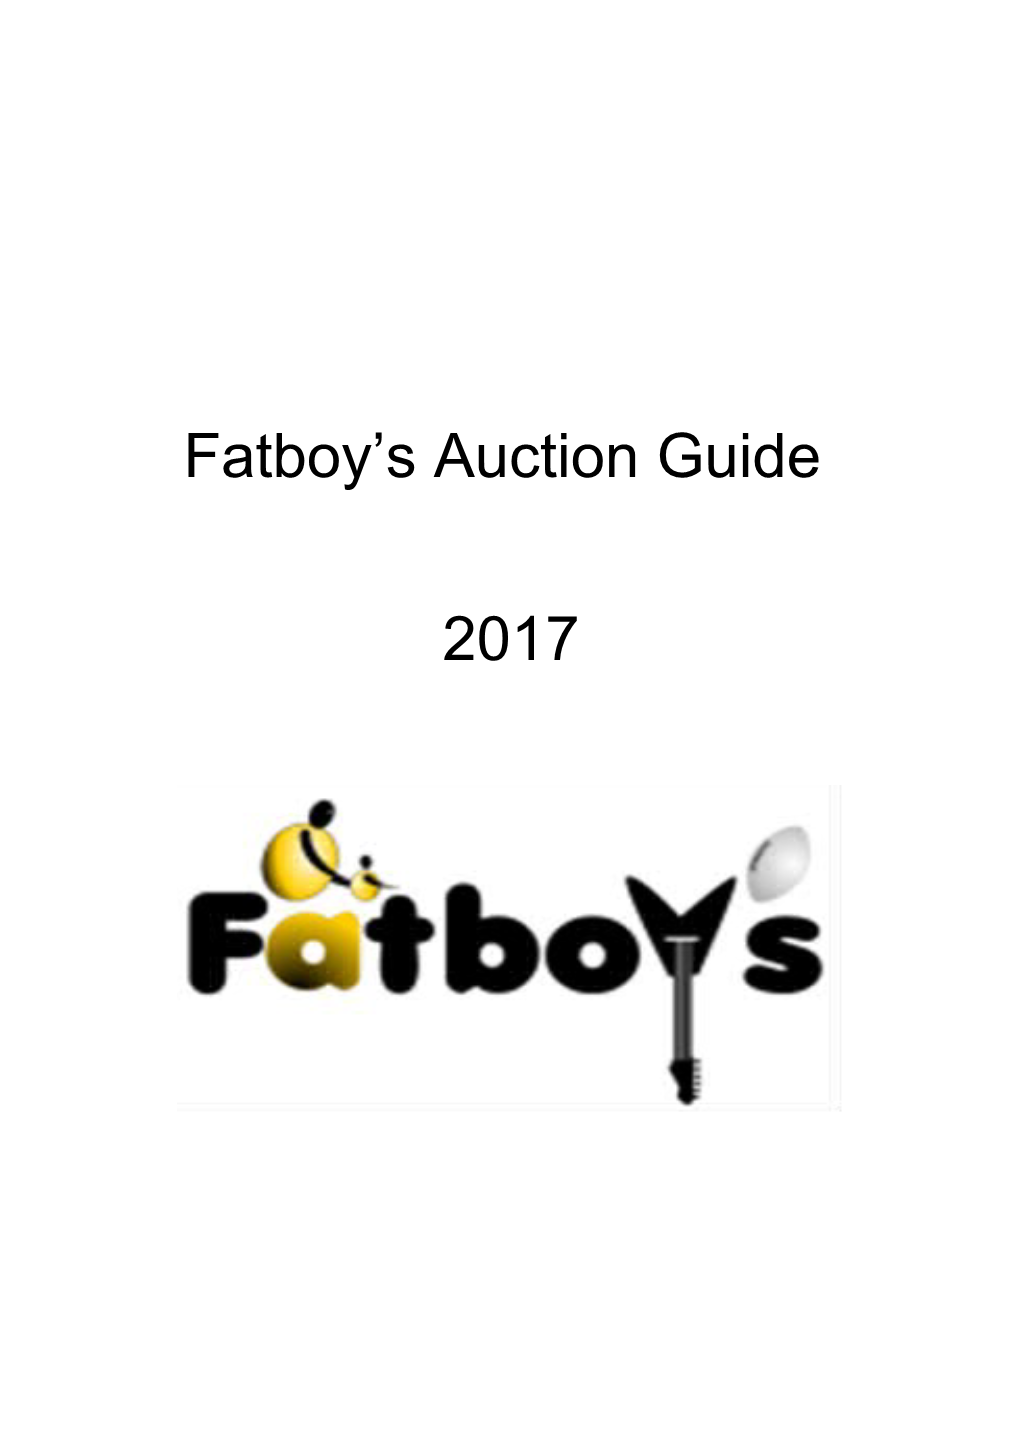 Items Will Be Auctioned in the Order Shown on the Guide